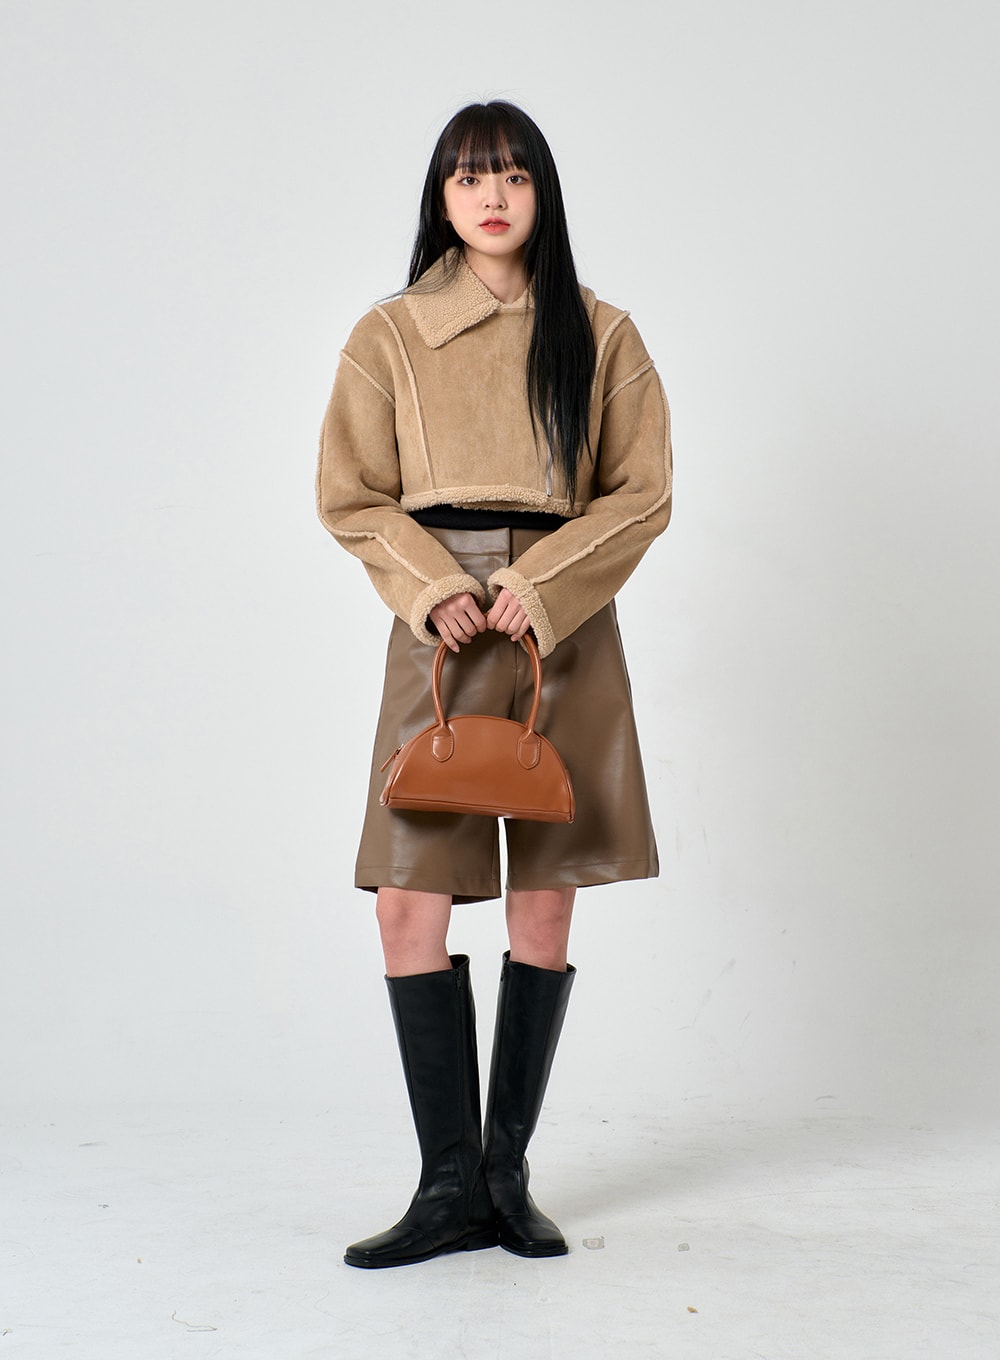 Check styling ideas for「Half-Moon Mini Shoulder Bag」